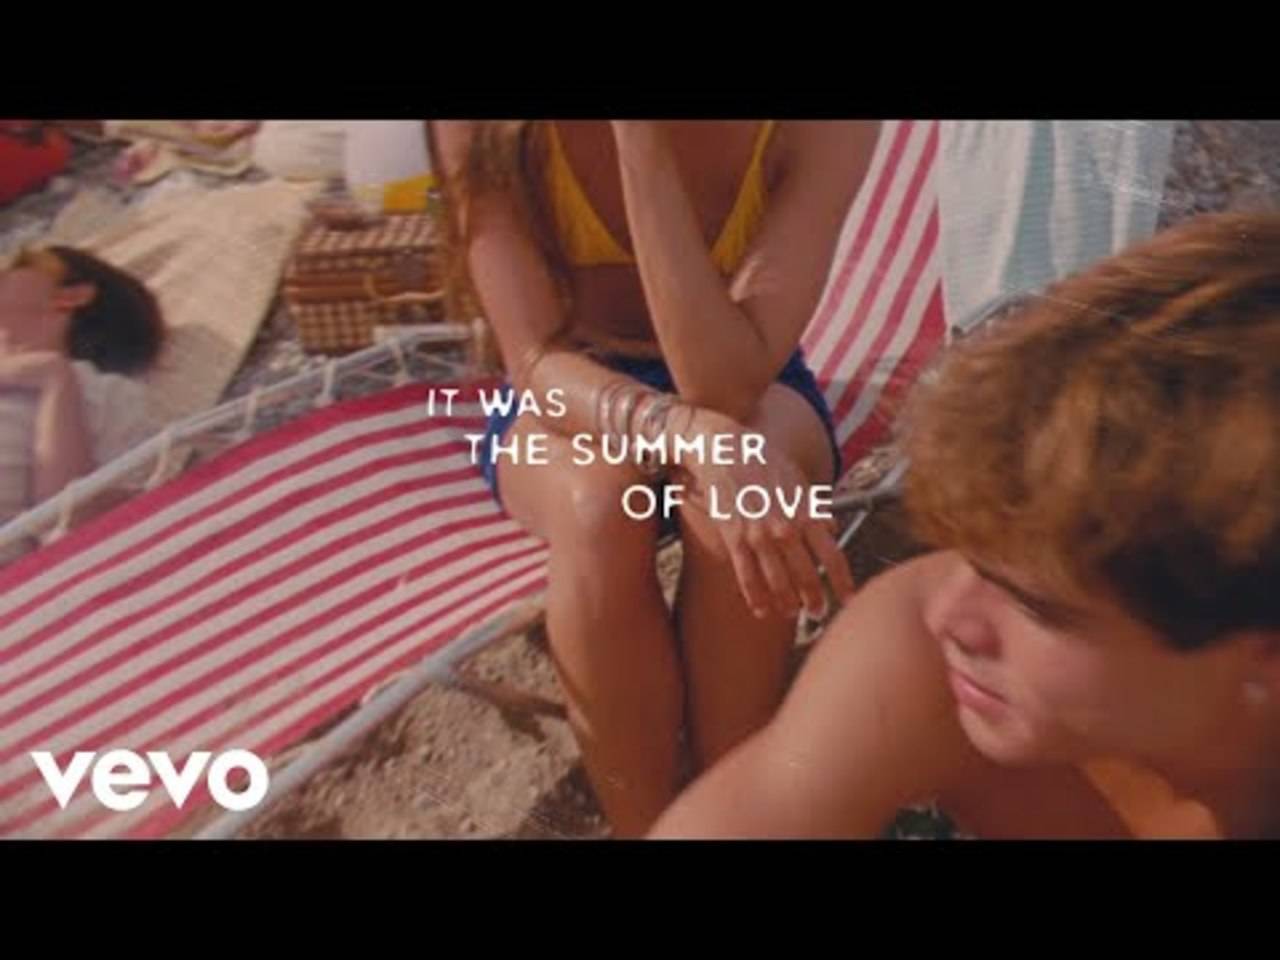 English Bpvideo - Watch Latest English Official Music Lyrical Video Song - 'Summer Of Love'  Sung By Shawn Mendes And Tainy | English Video Songs - Times of India